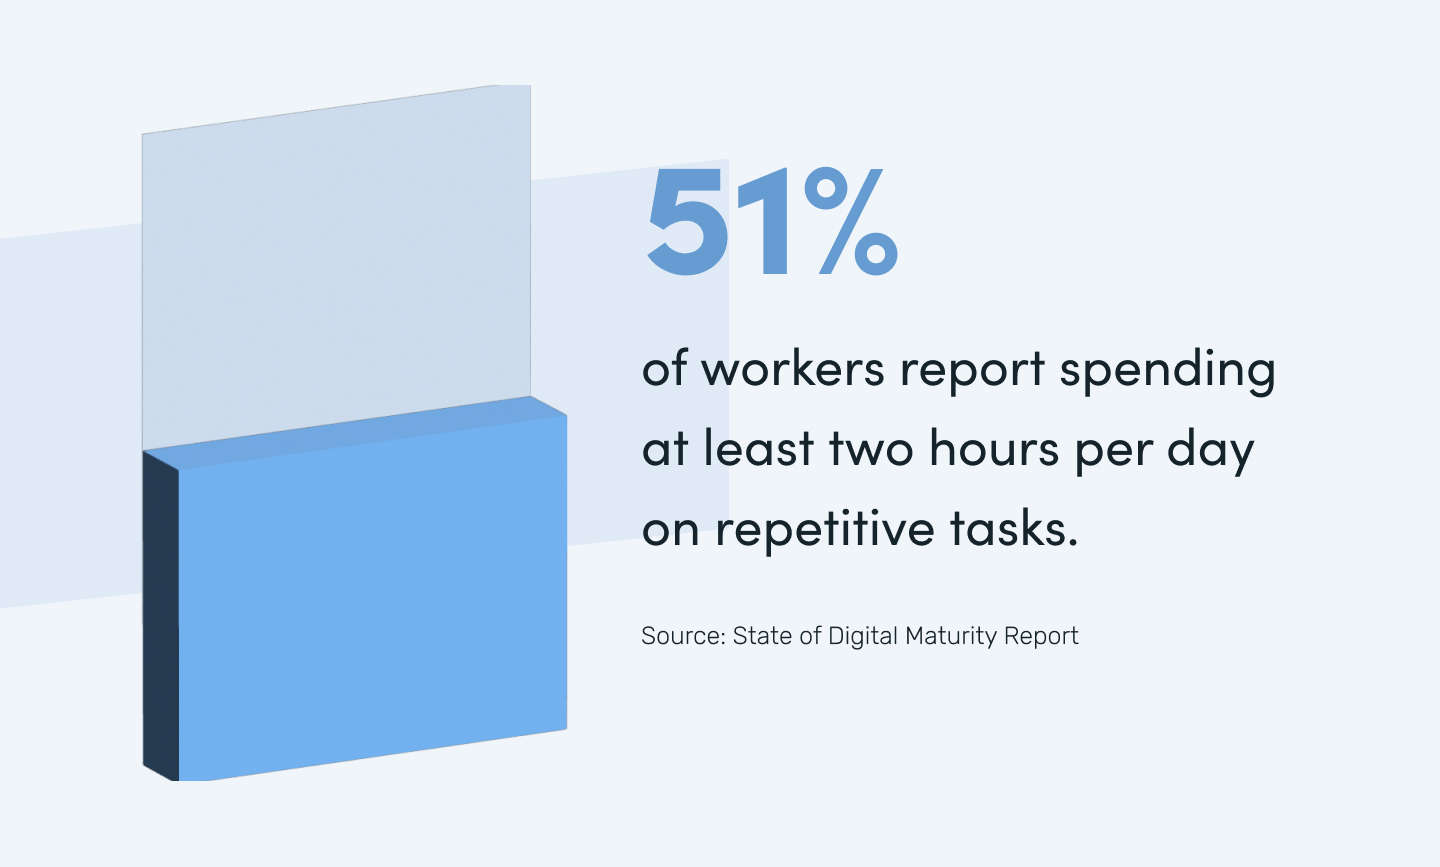 51% of workers report spending at least two hours per day on repetitive tasks